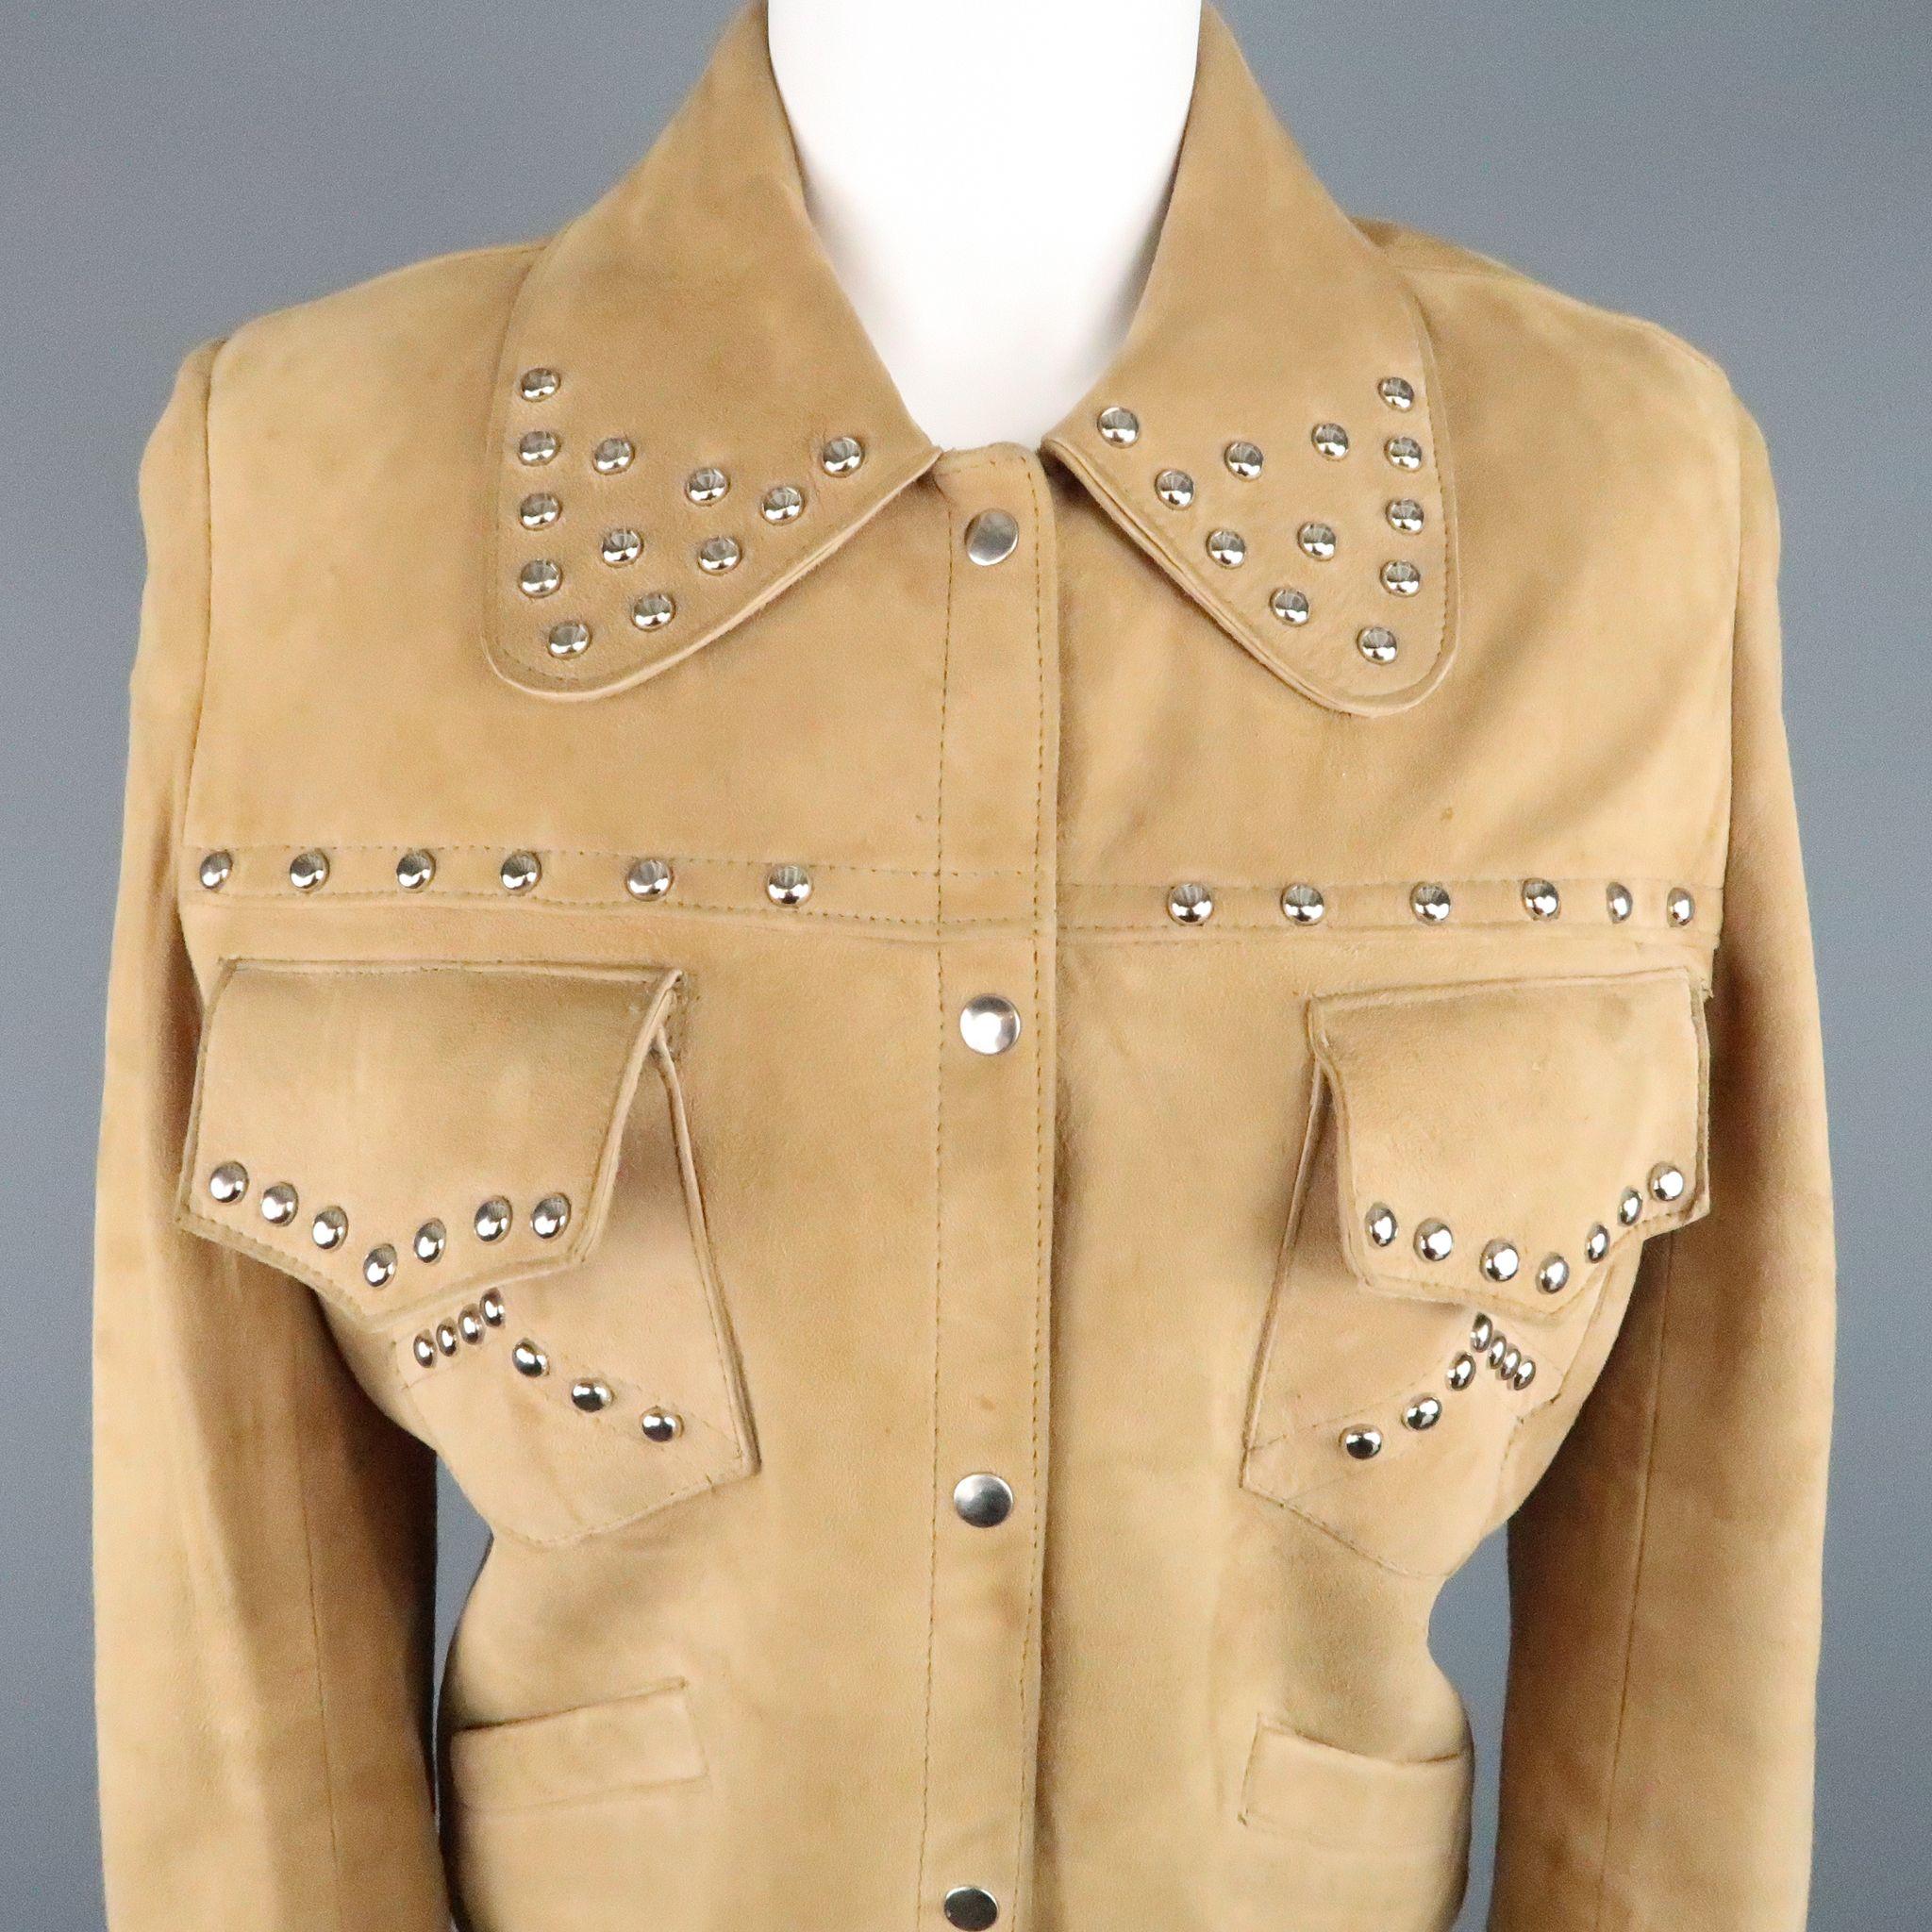 Vintage I.MAGNIN cropped jacket comes in a soft tan suede and features an oversized collar with silver tone studs, patch flap pockets. slit pockets, snap front closure, and tab cuffs. Wear throughout suede. As-Is.
 
Fair Pre-Owned Condition.
Marked: